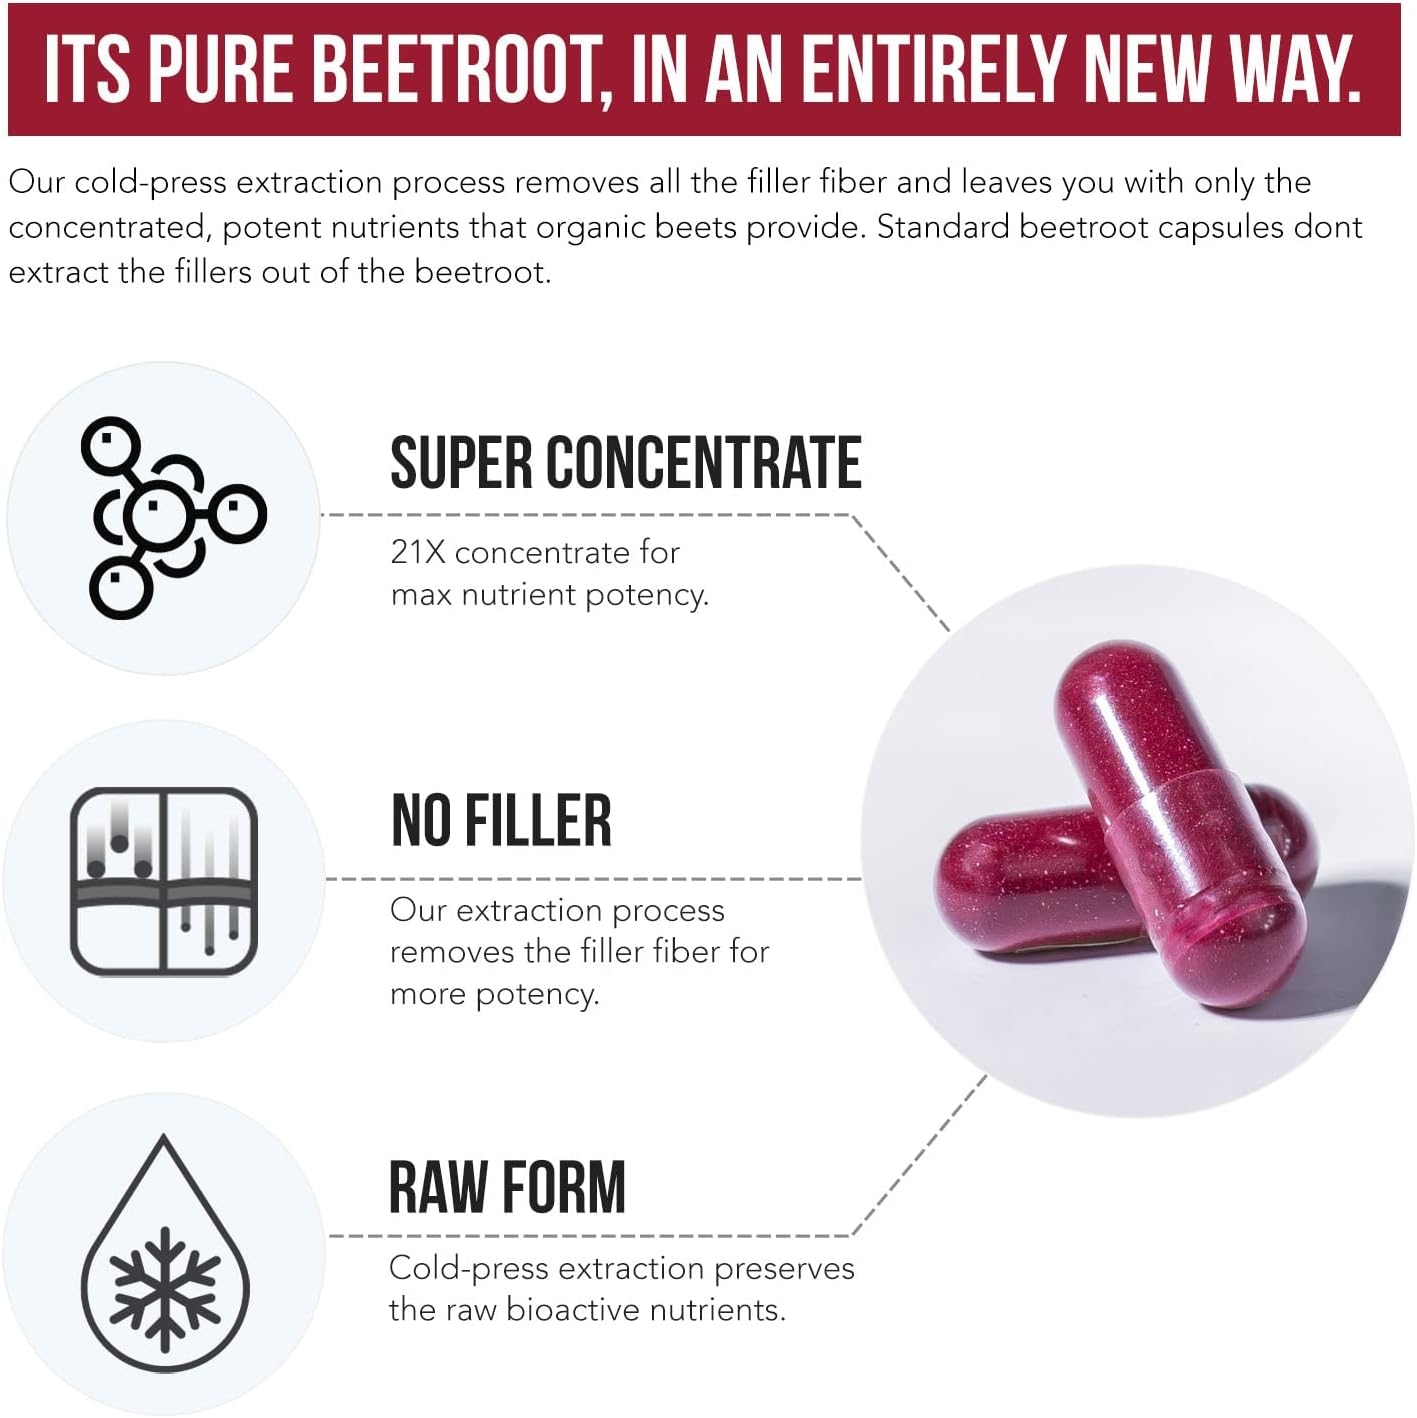 BioBeet® Max Strength Beet Root Capsules - 21:1 Concentrate, Each Serving Derived from 28,350 mg Organic Beetroot - Absorption Enhancement with BioPerine® Black Pepper Extract (60 Capsules)